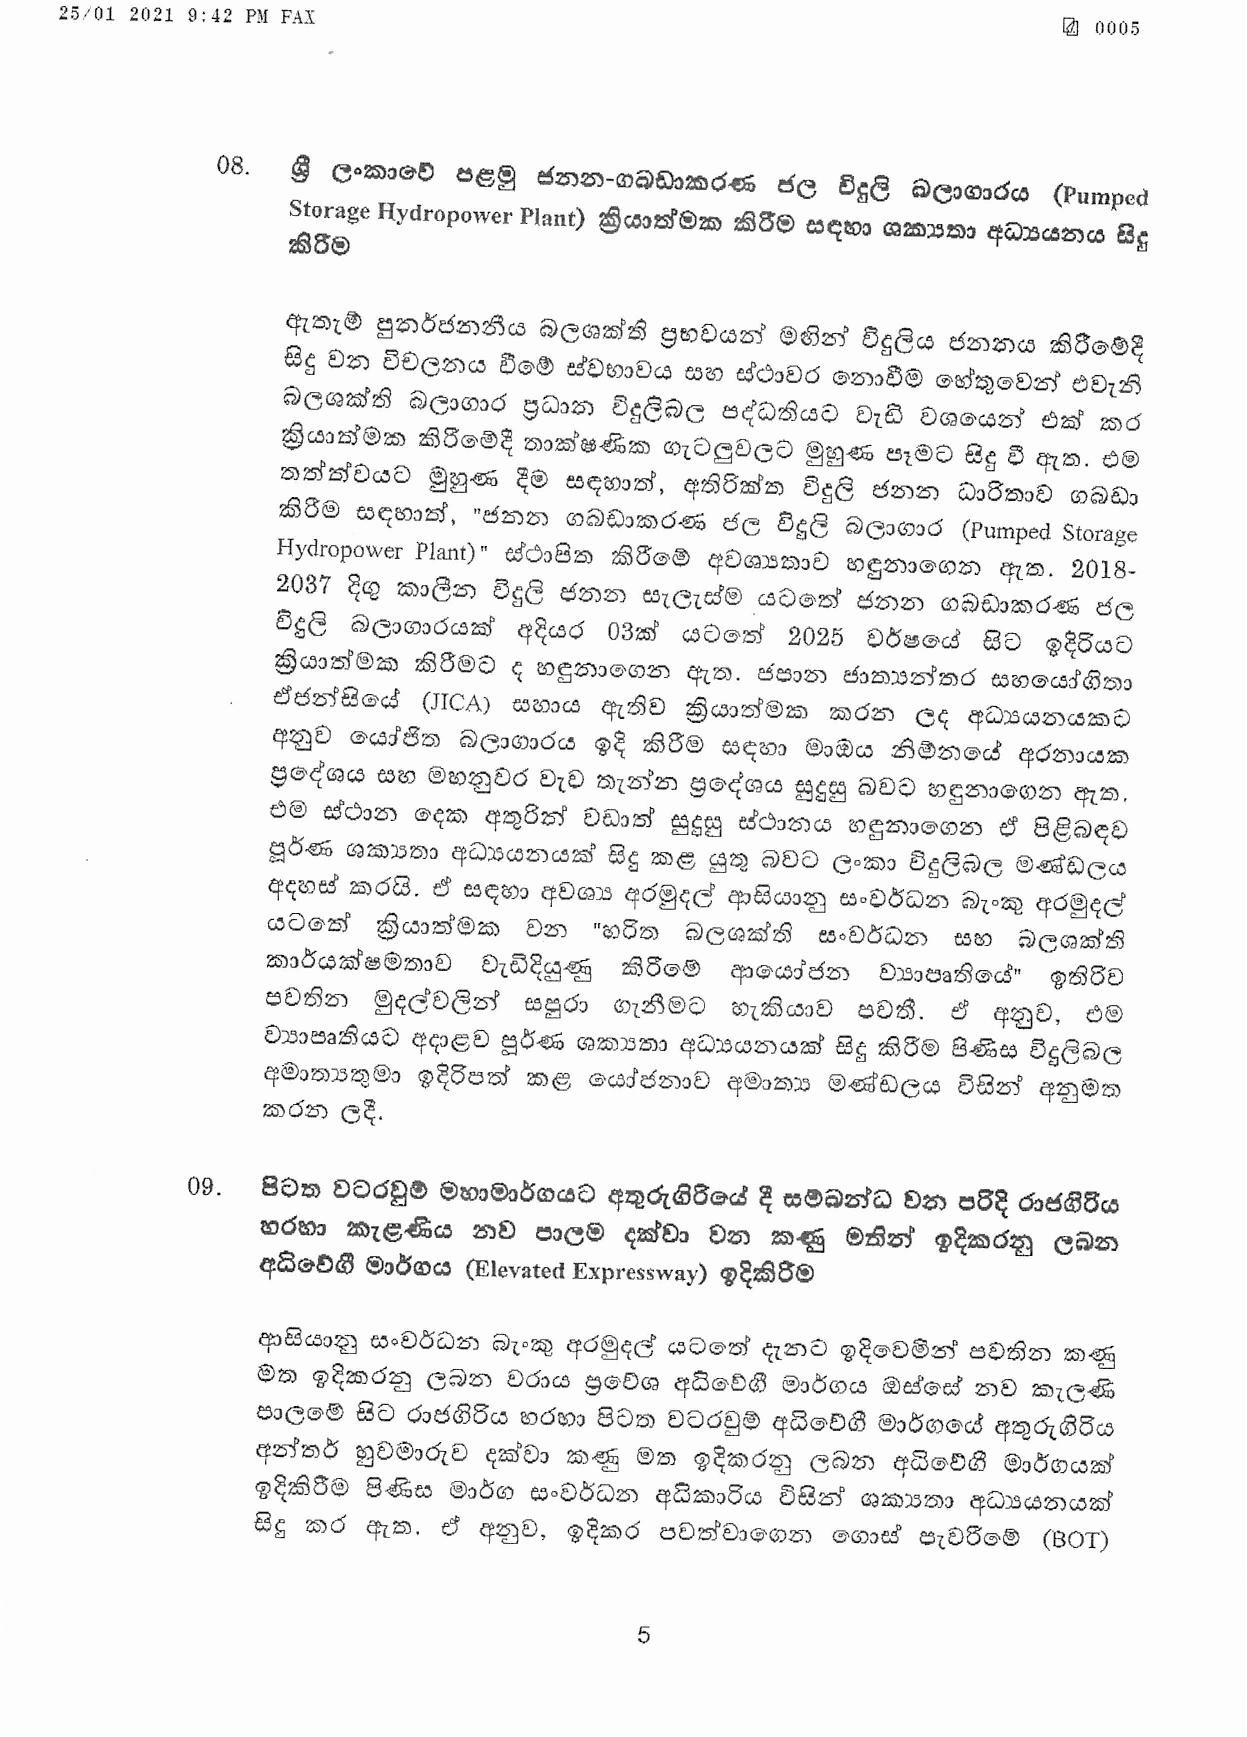 Cabinet Decision on 25.01.2021 1 page 005